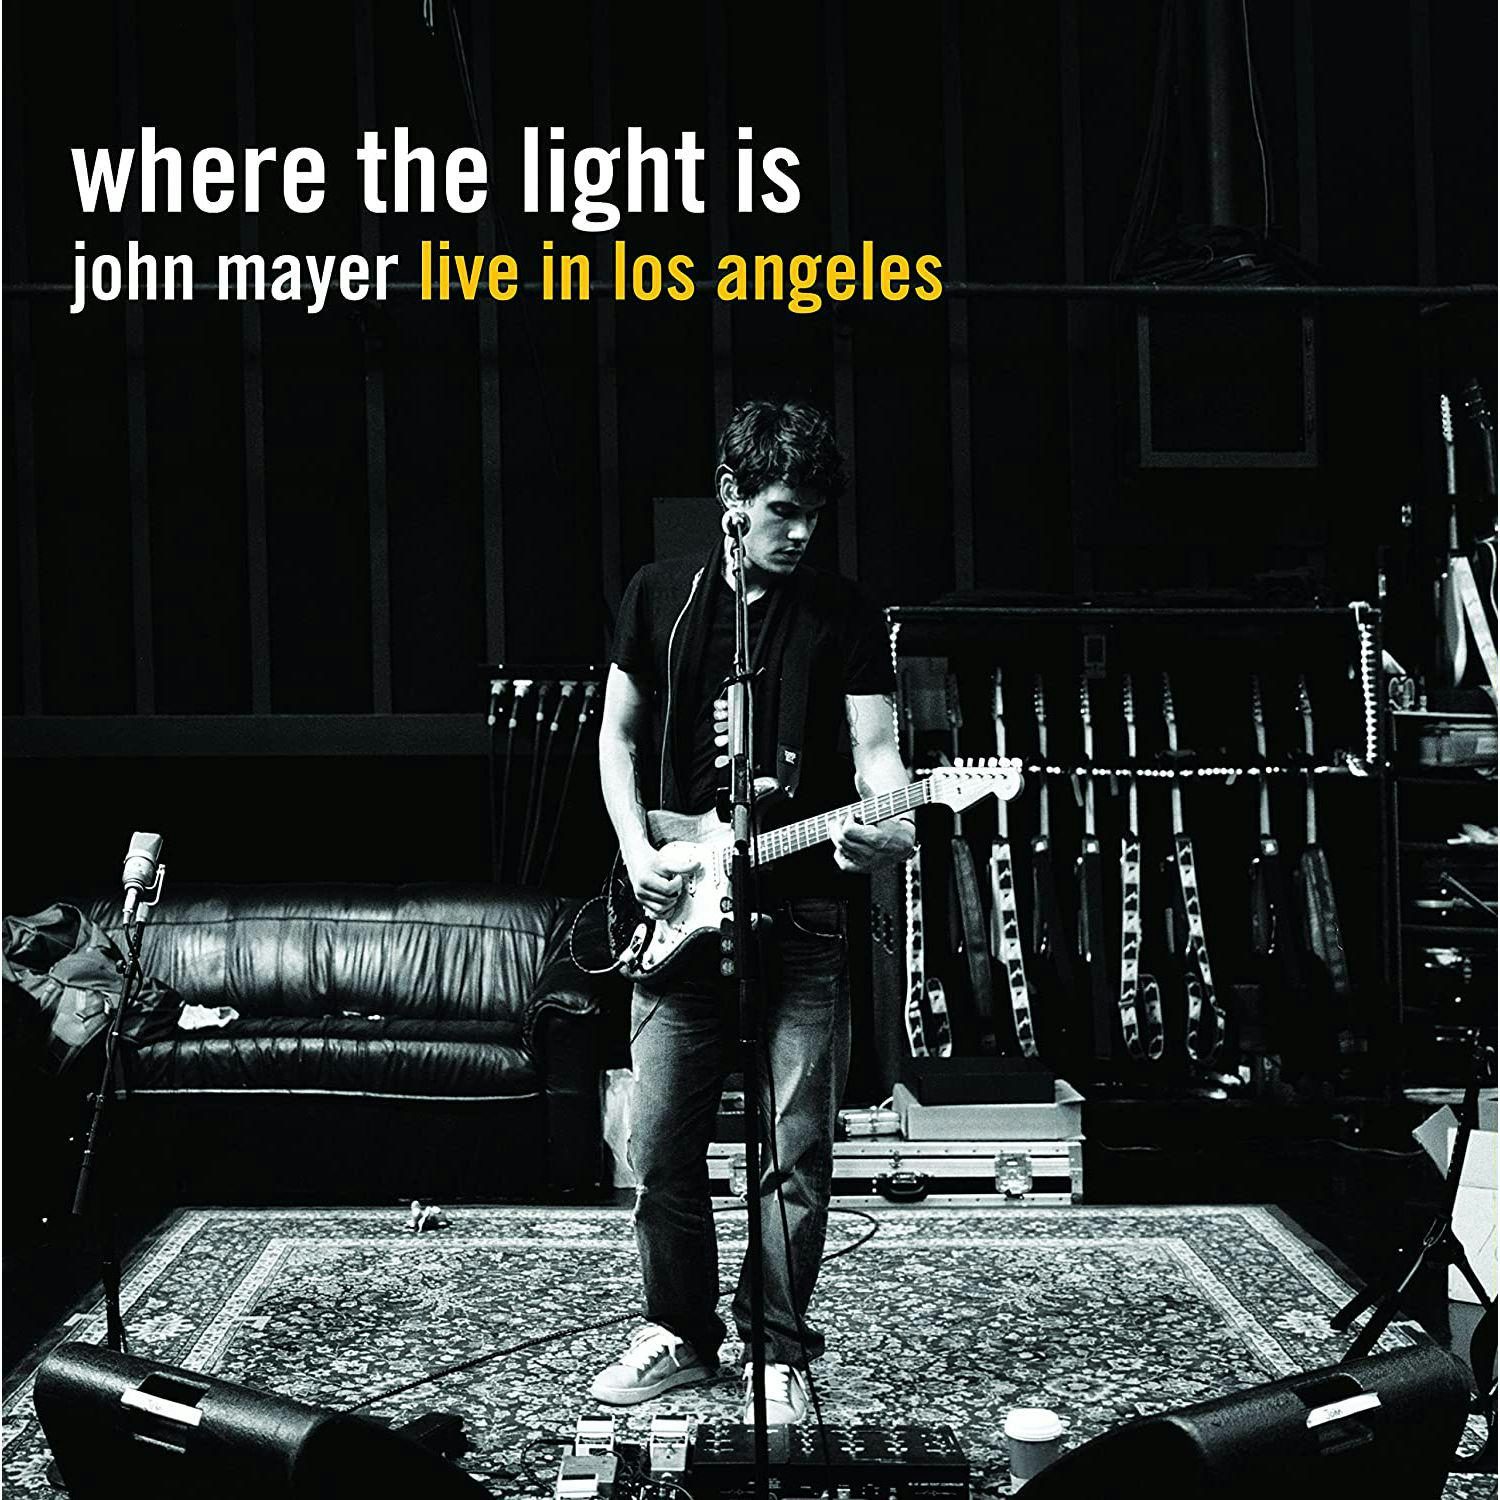 Where the Light Is: John Mayer Live in Los Angeles (4LP) Box Set 